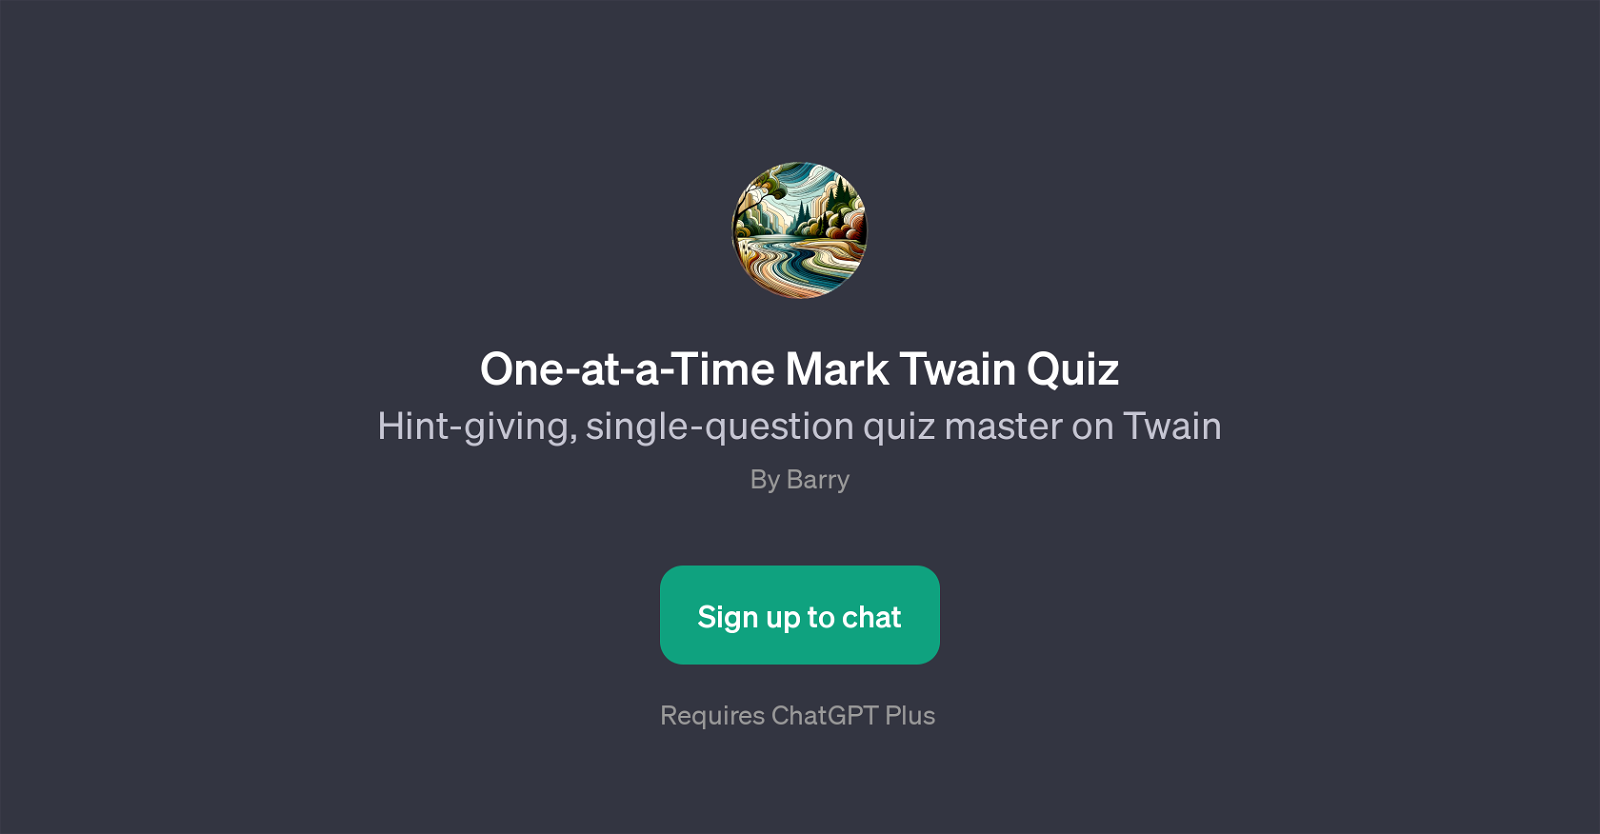 One-at-a-Time Mark Twain Quiz website